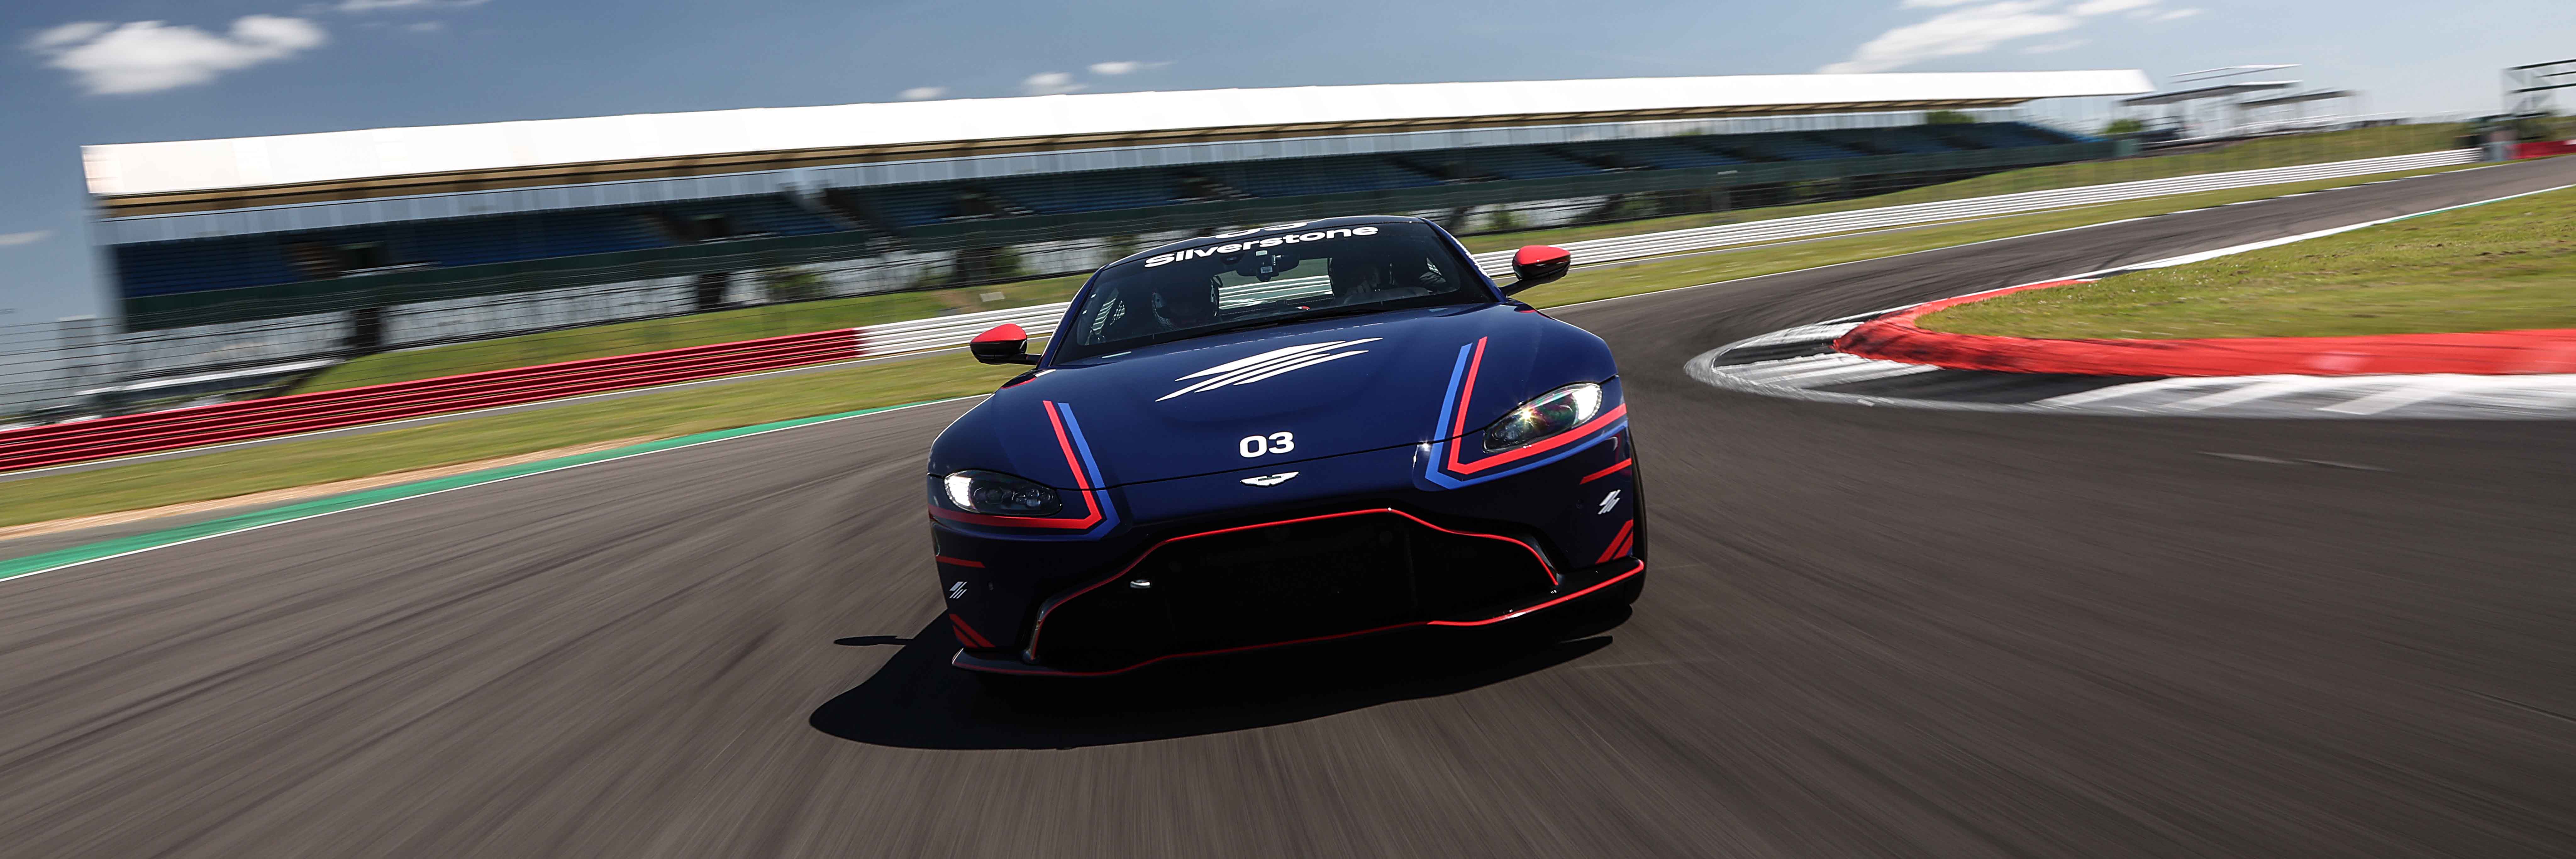 An Aston Martin Vantage cornering at a Silverstone Driving Experience